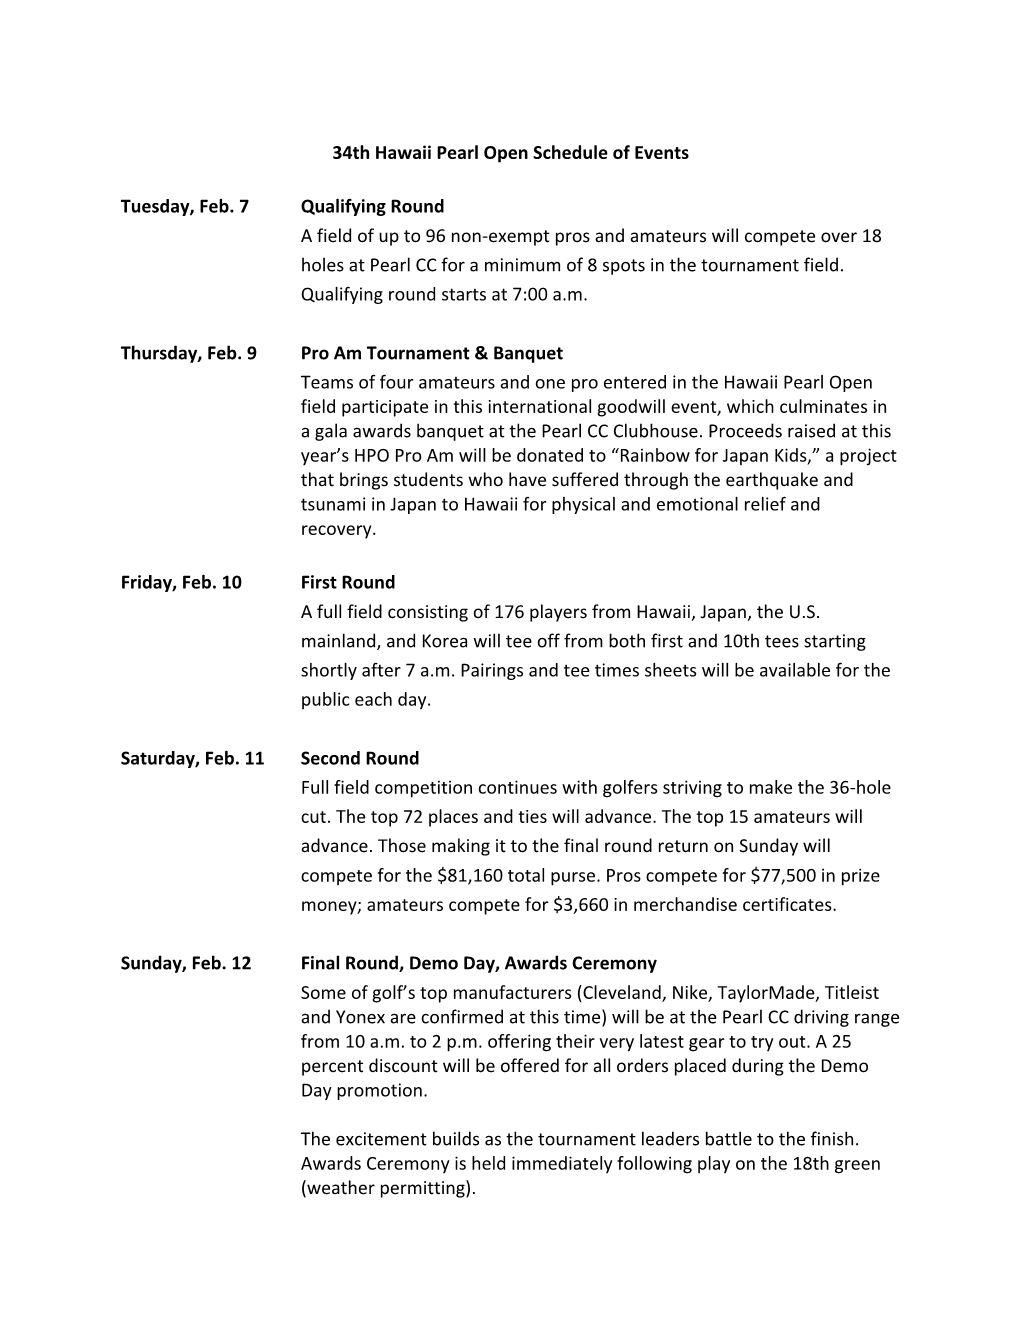 2012 HPO Schedule of Events